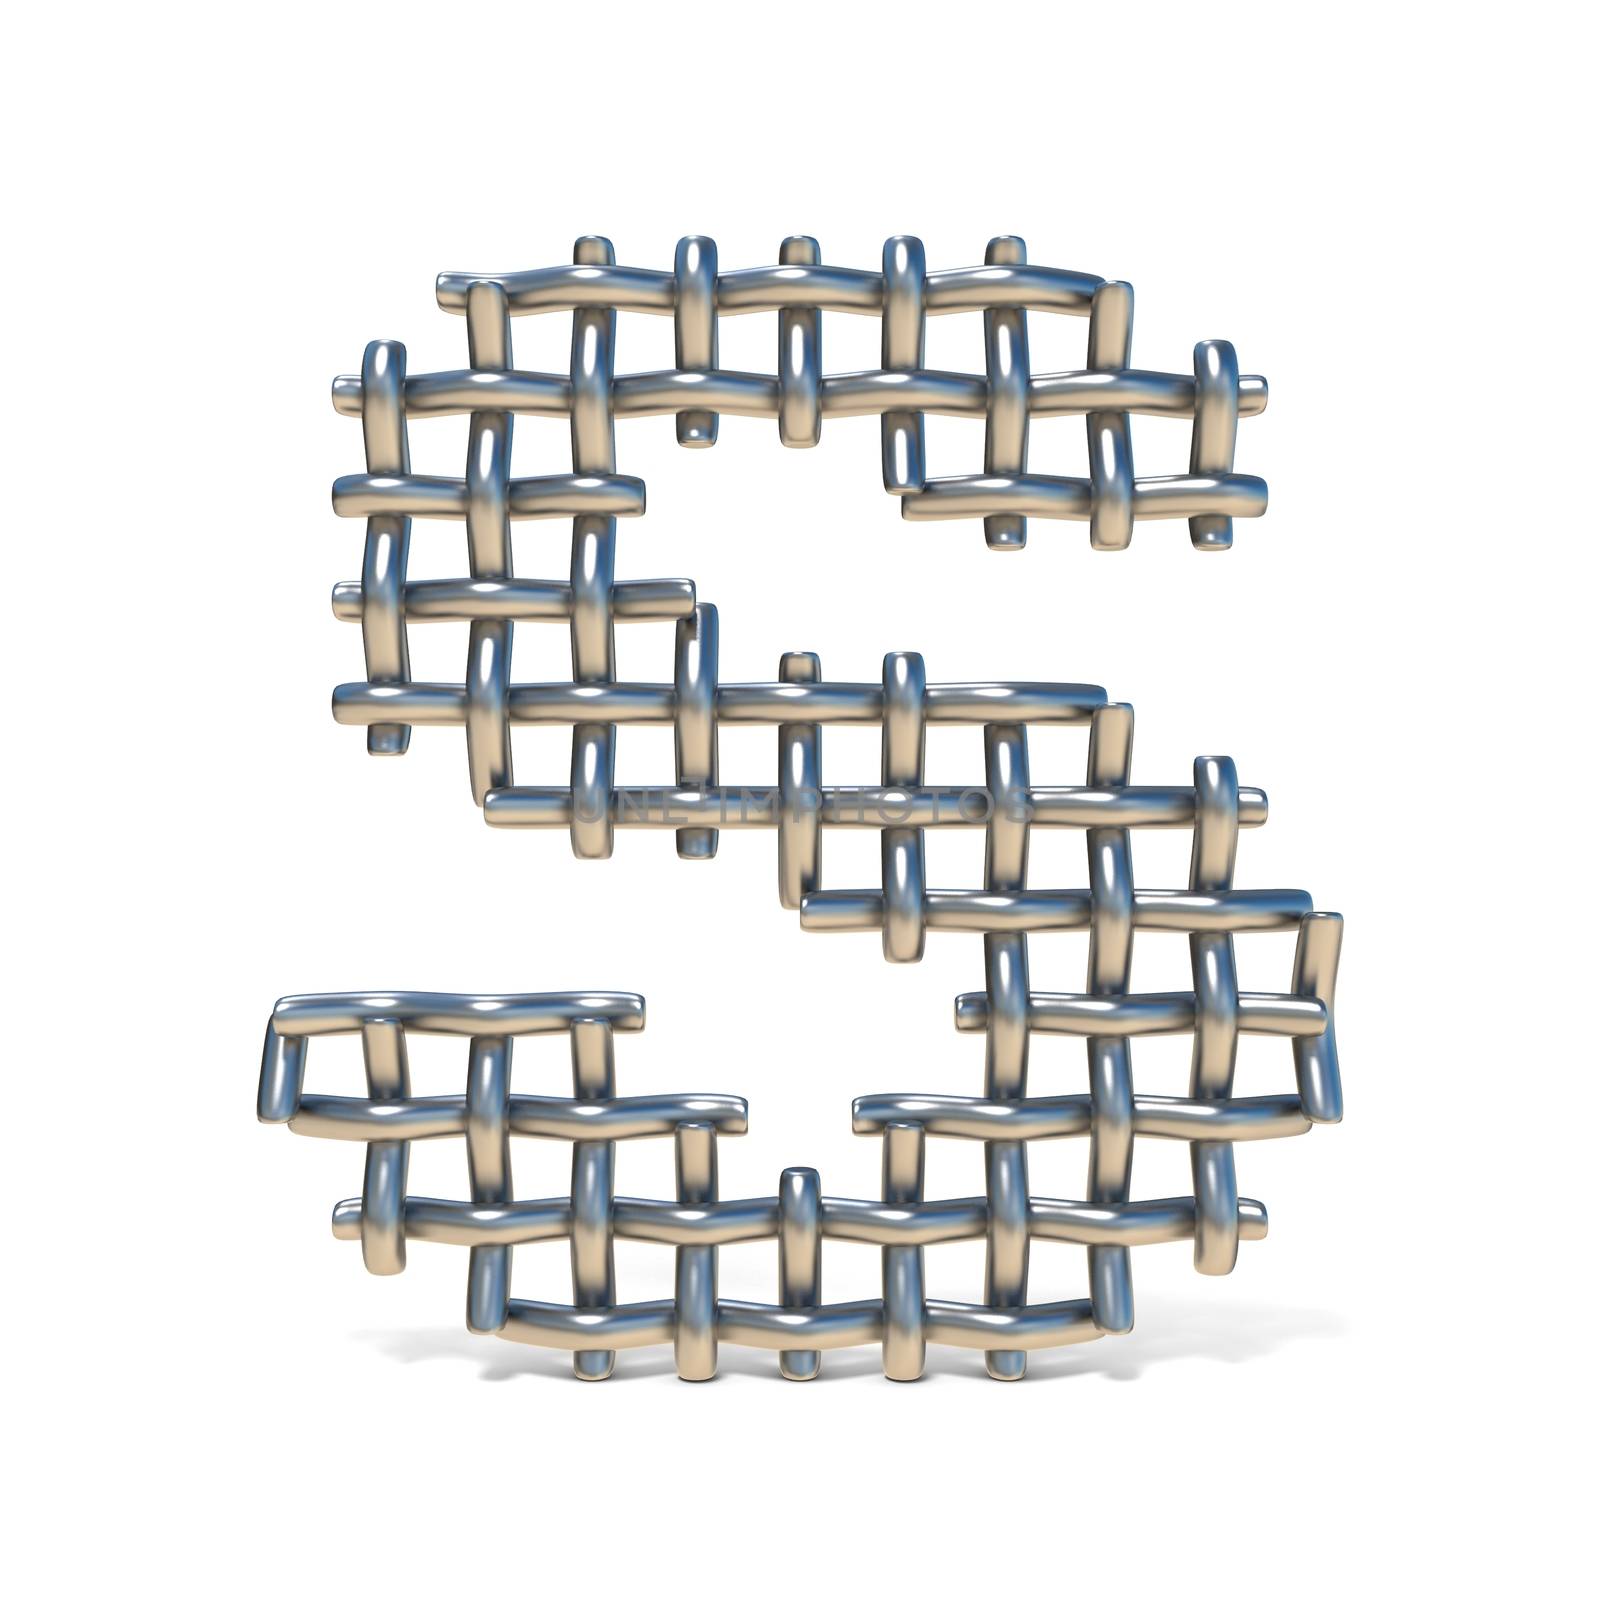 Metal wire mesh font LETTER S 3D render illustration isolated on white background